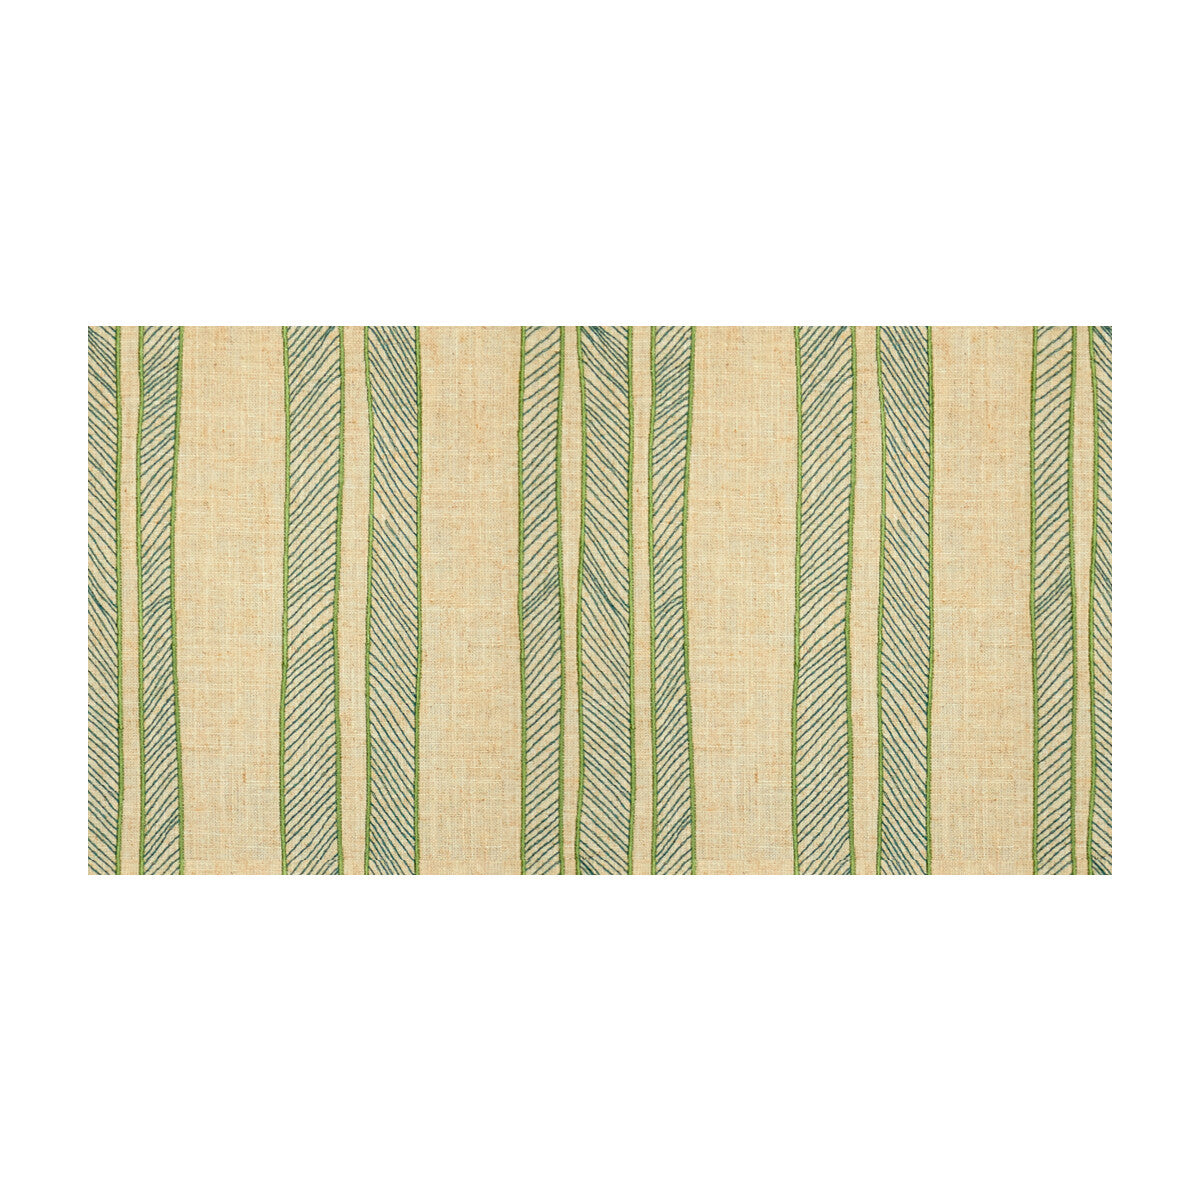 Cords fabric in fern color - pattern PF50387.4.0 - by Baker Lifestyle in the Waterside collection